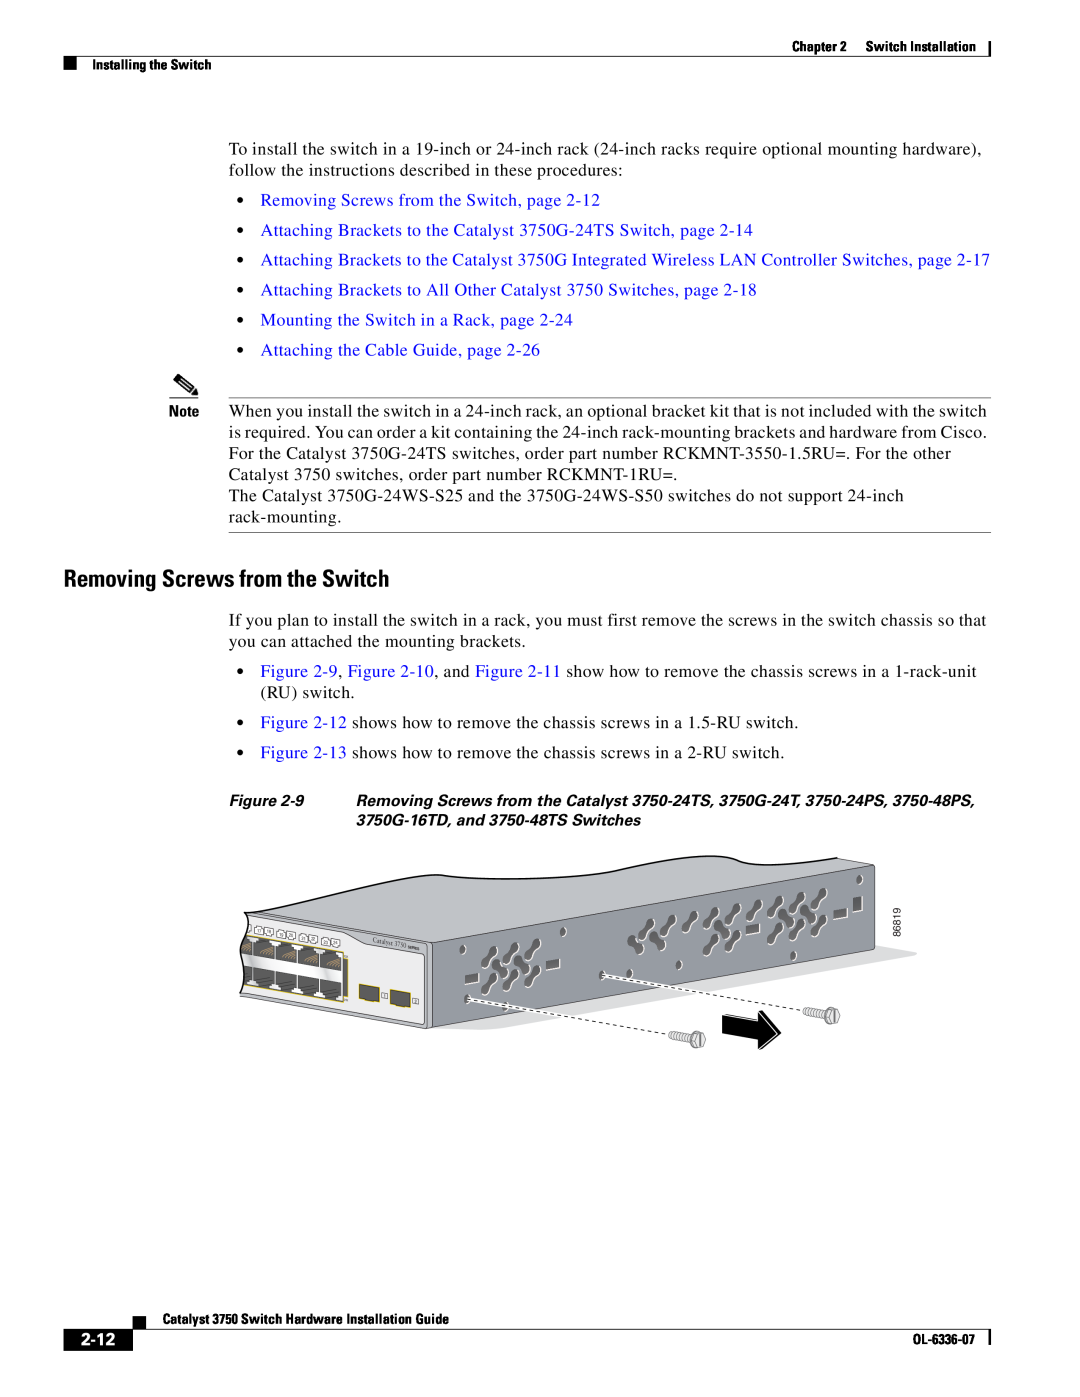 Cisco Systems WSC3750X24TS specifications Removing Screws from the Switch, page, 2-12 